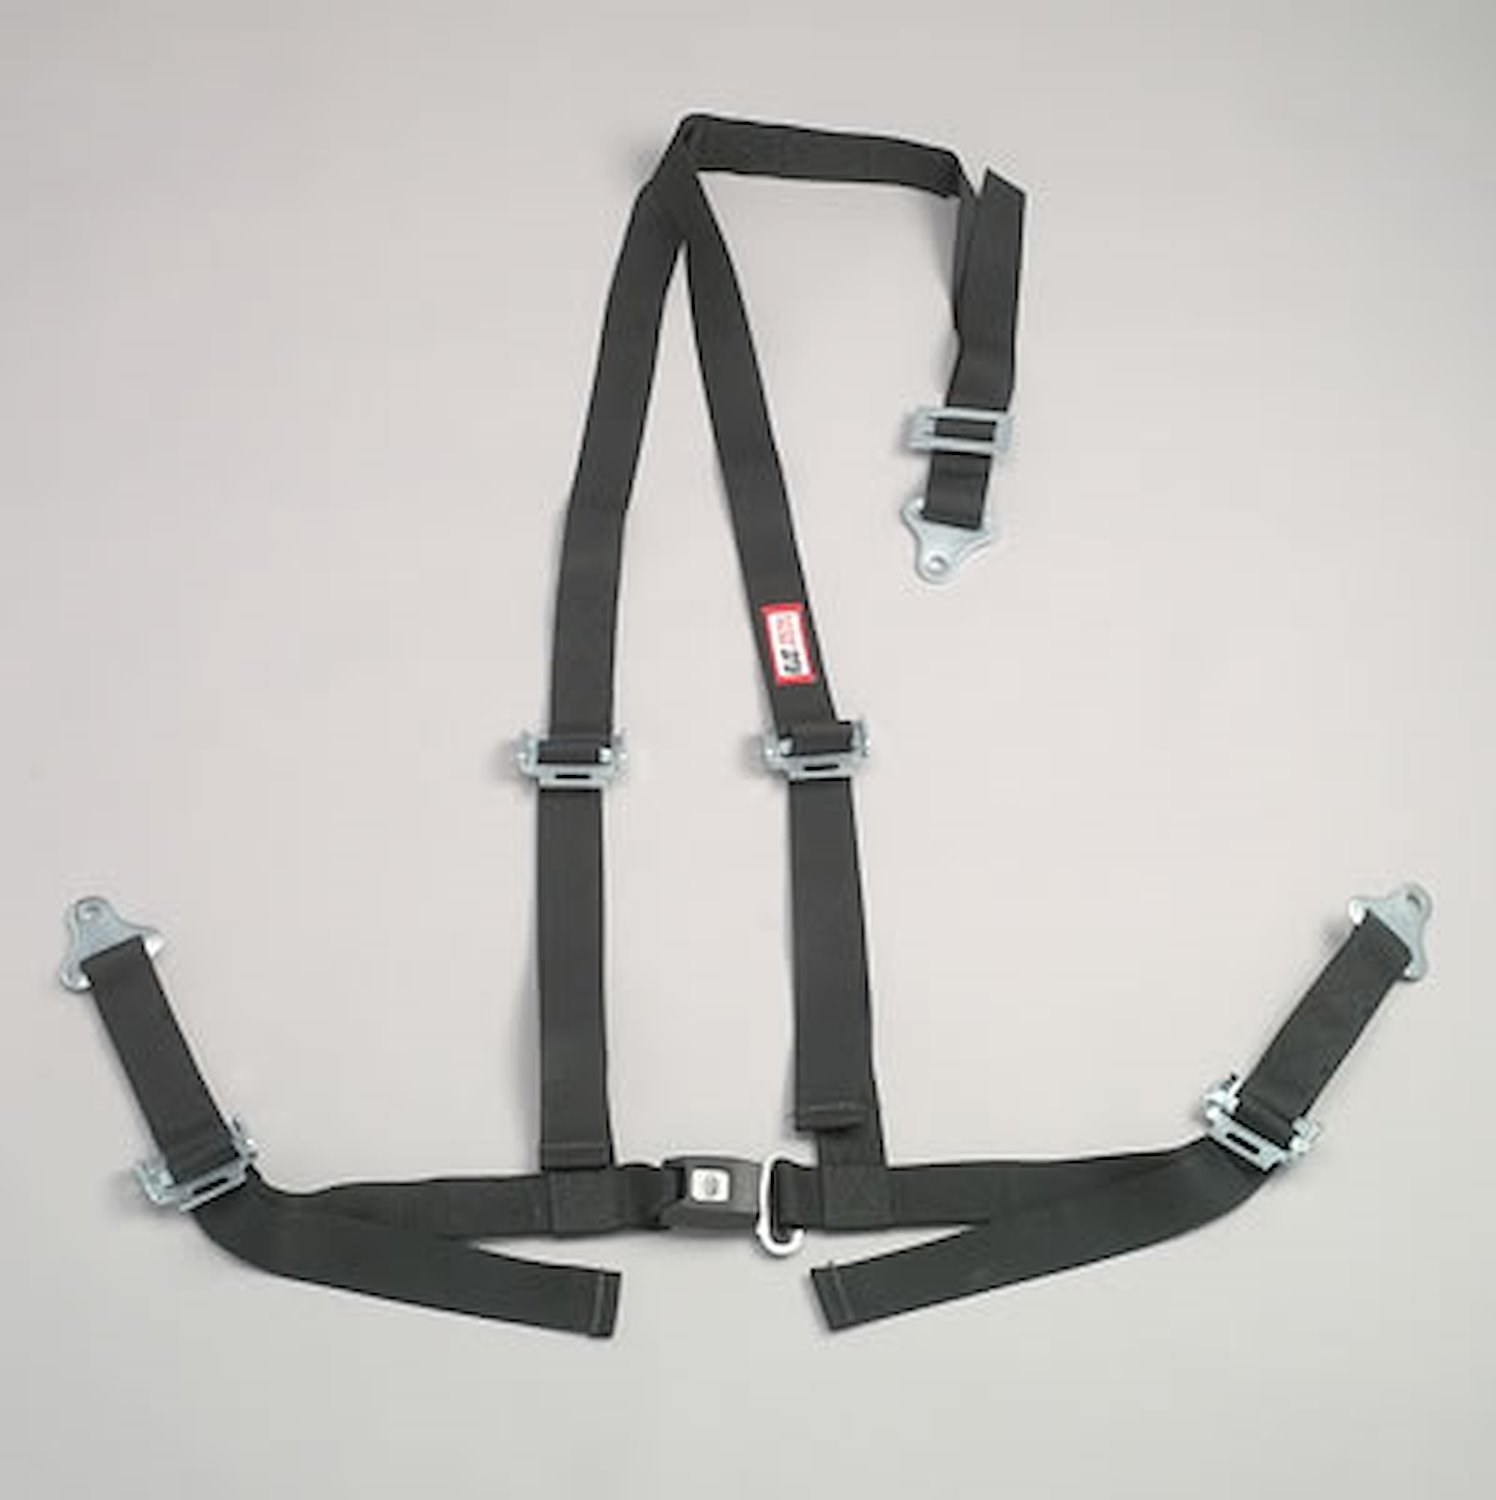 NON-SFI B&T HARNESS 2 PULL DOWN Lap Belt BOLT 2 S.H. INDIVIDUAL FLOOR Mount WRAP/BOLT RED